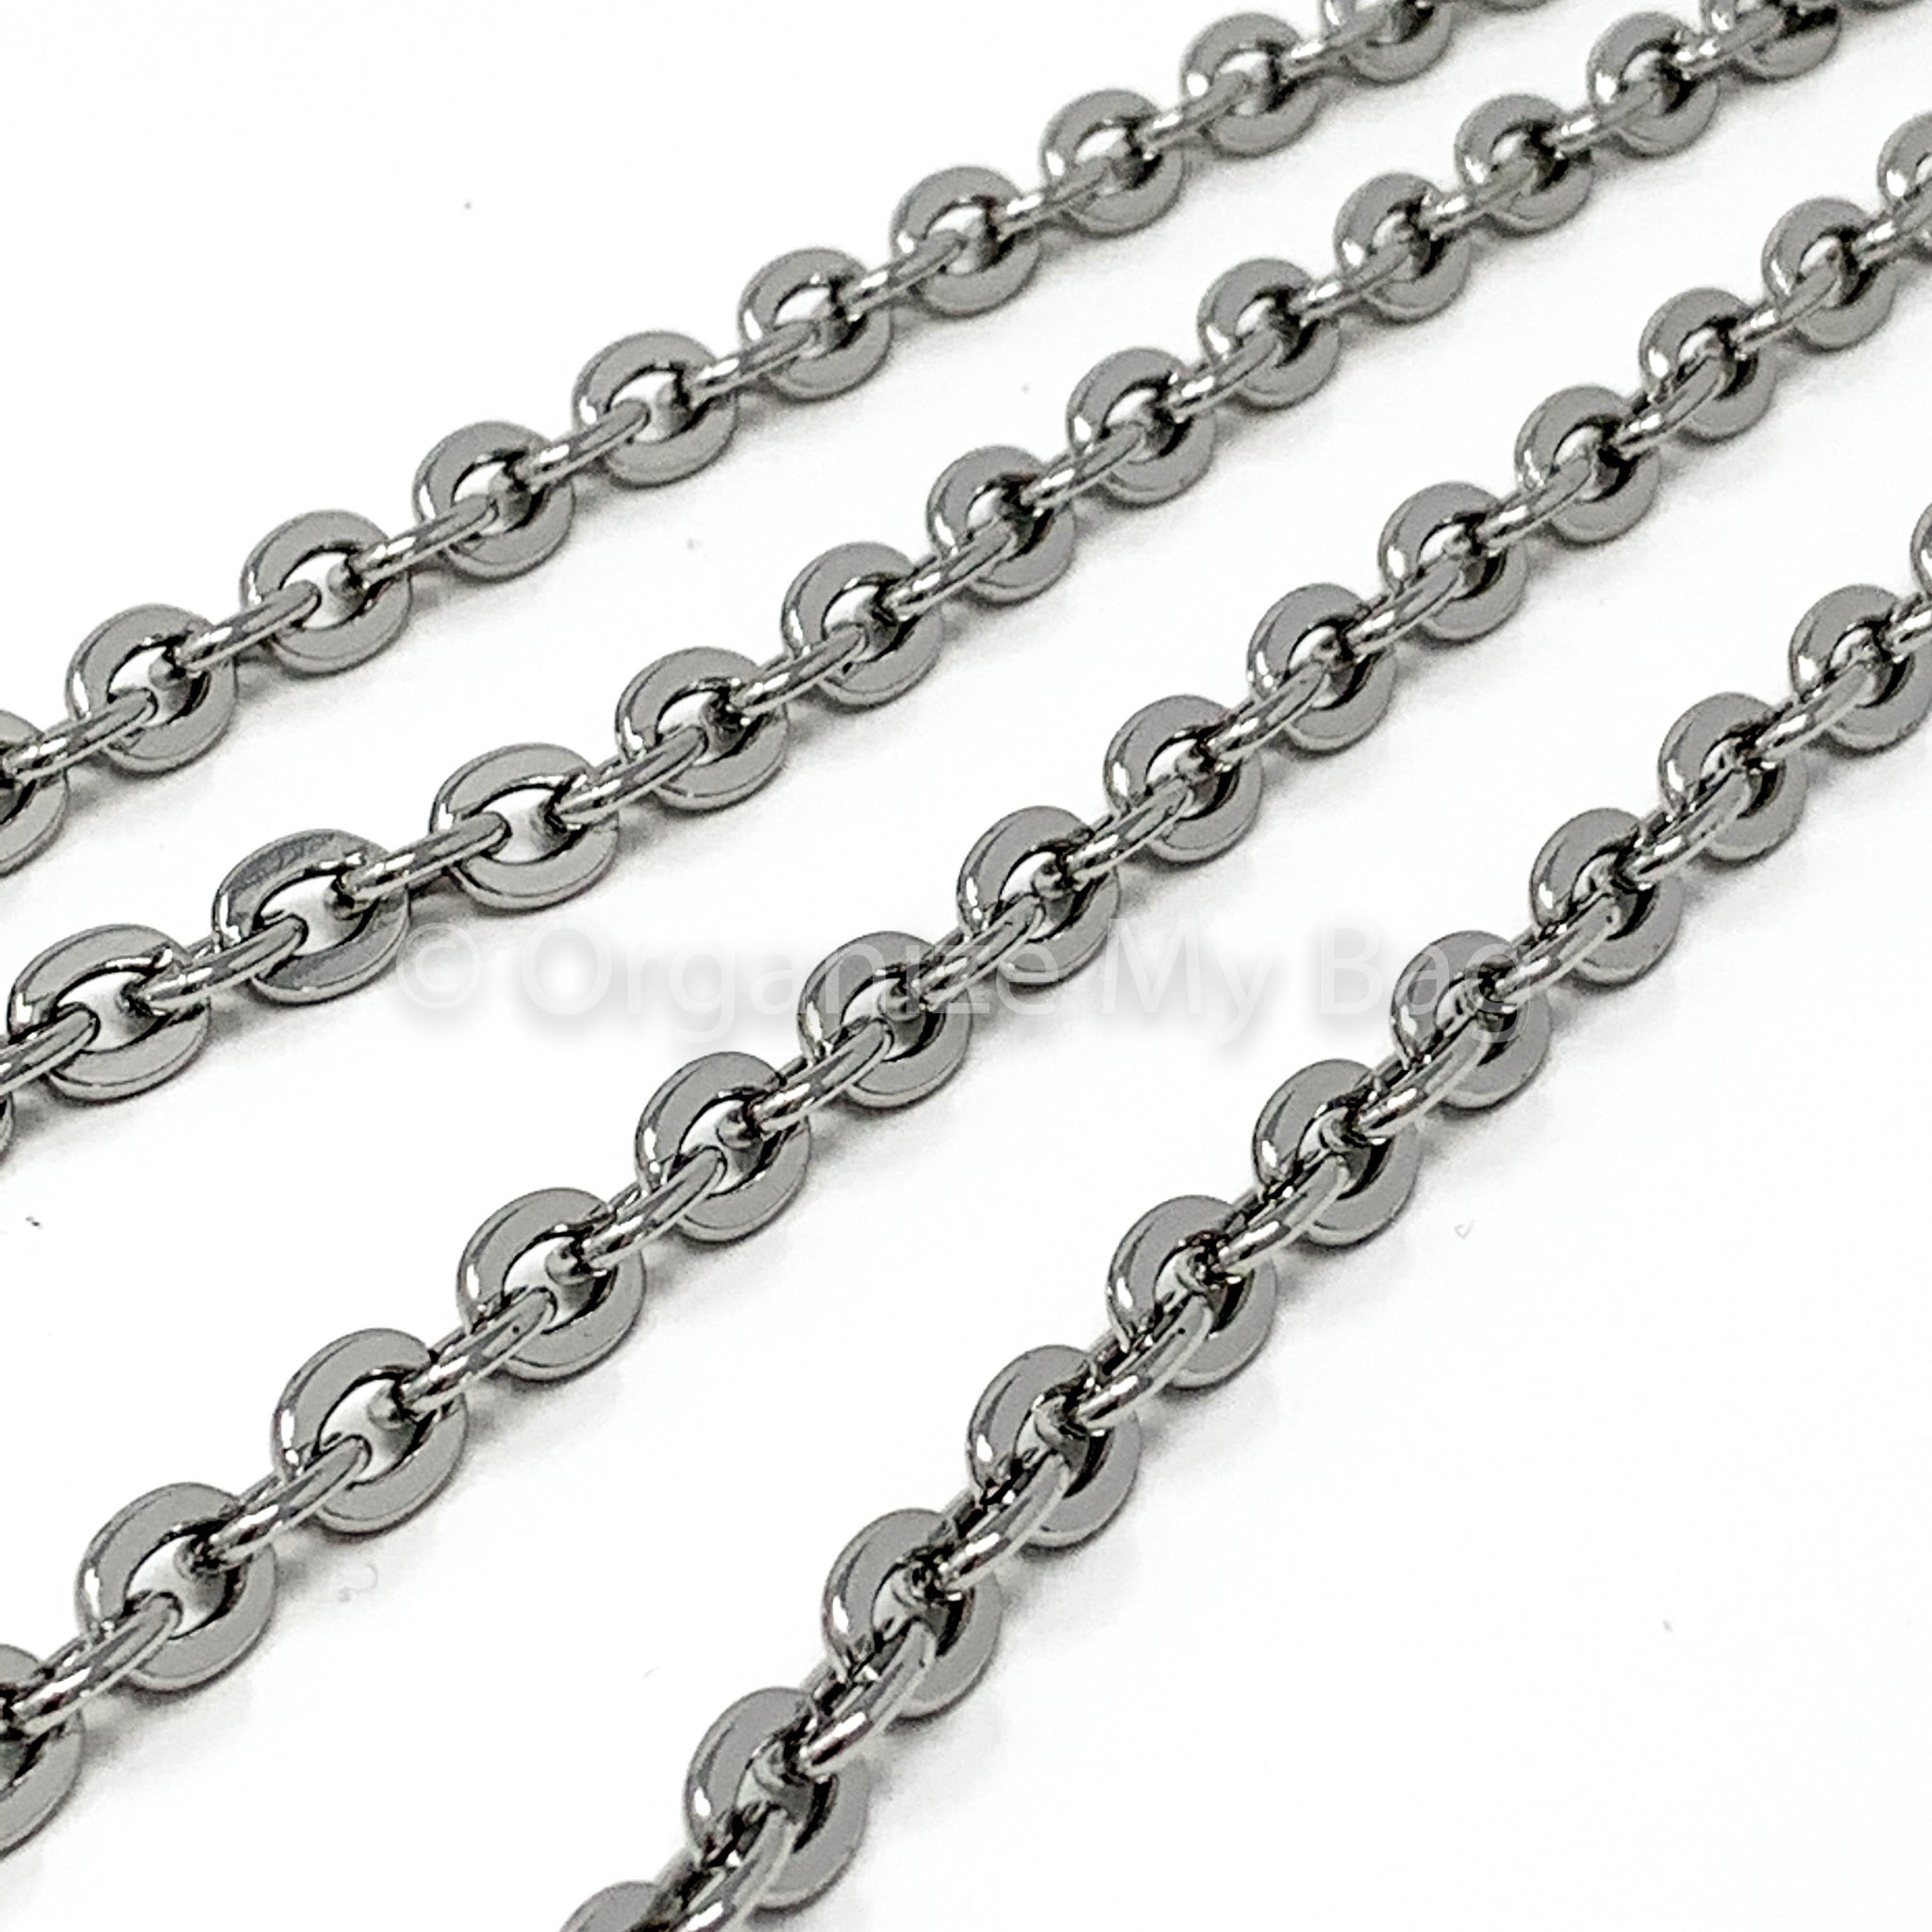 Shoulder Oval Chain Strap Replacement 18”